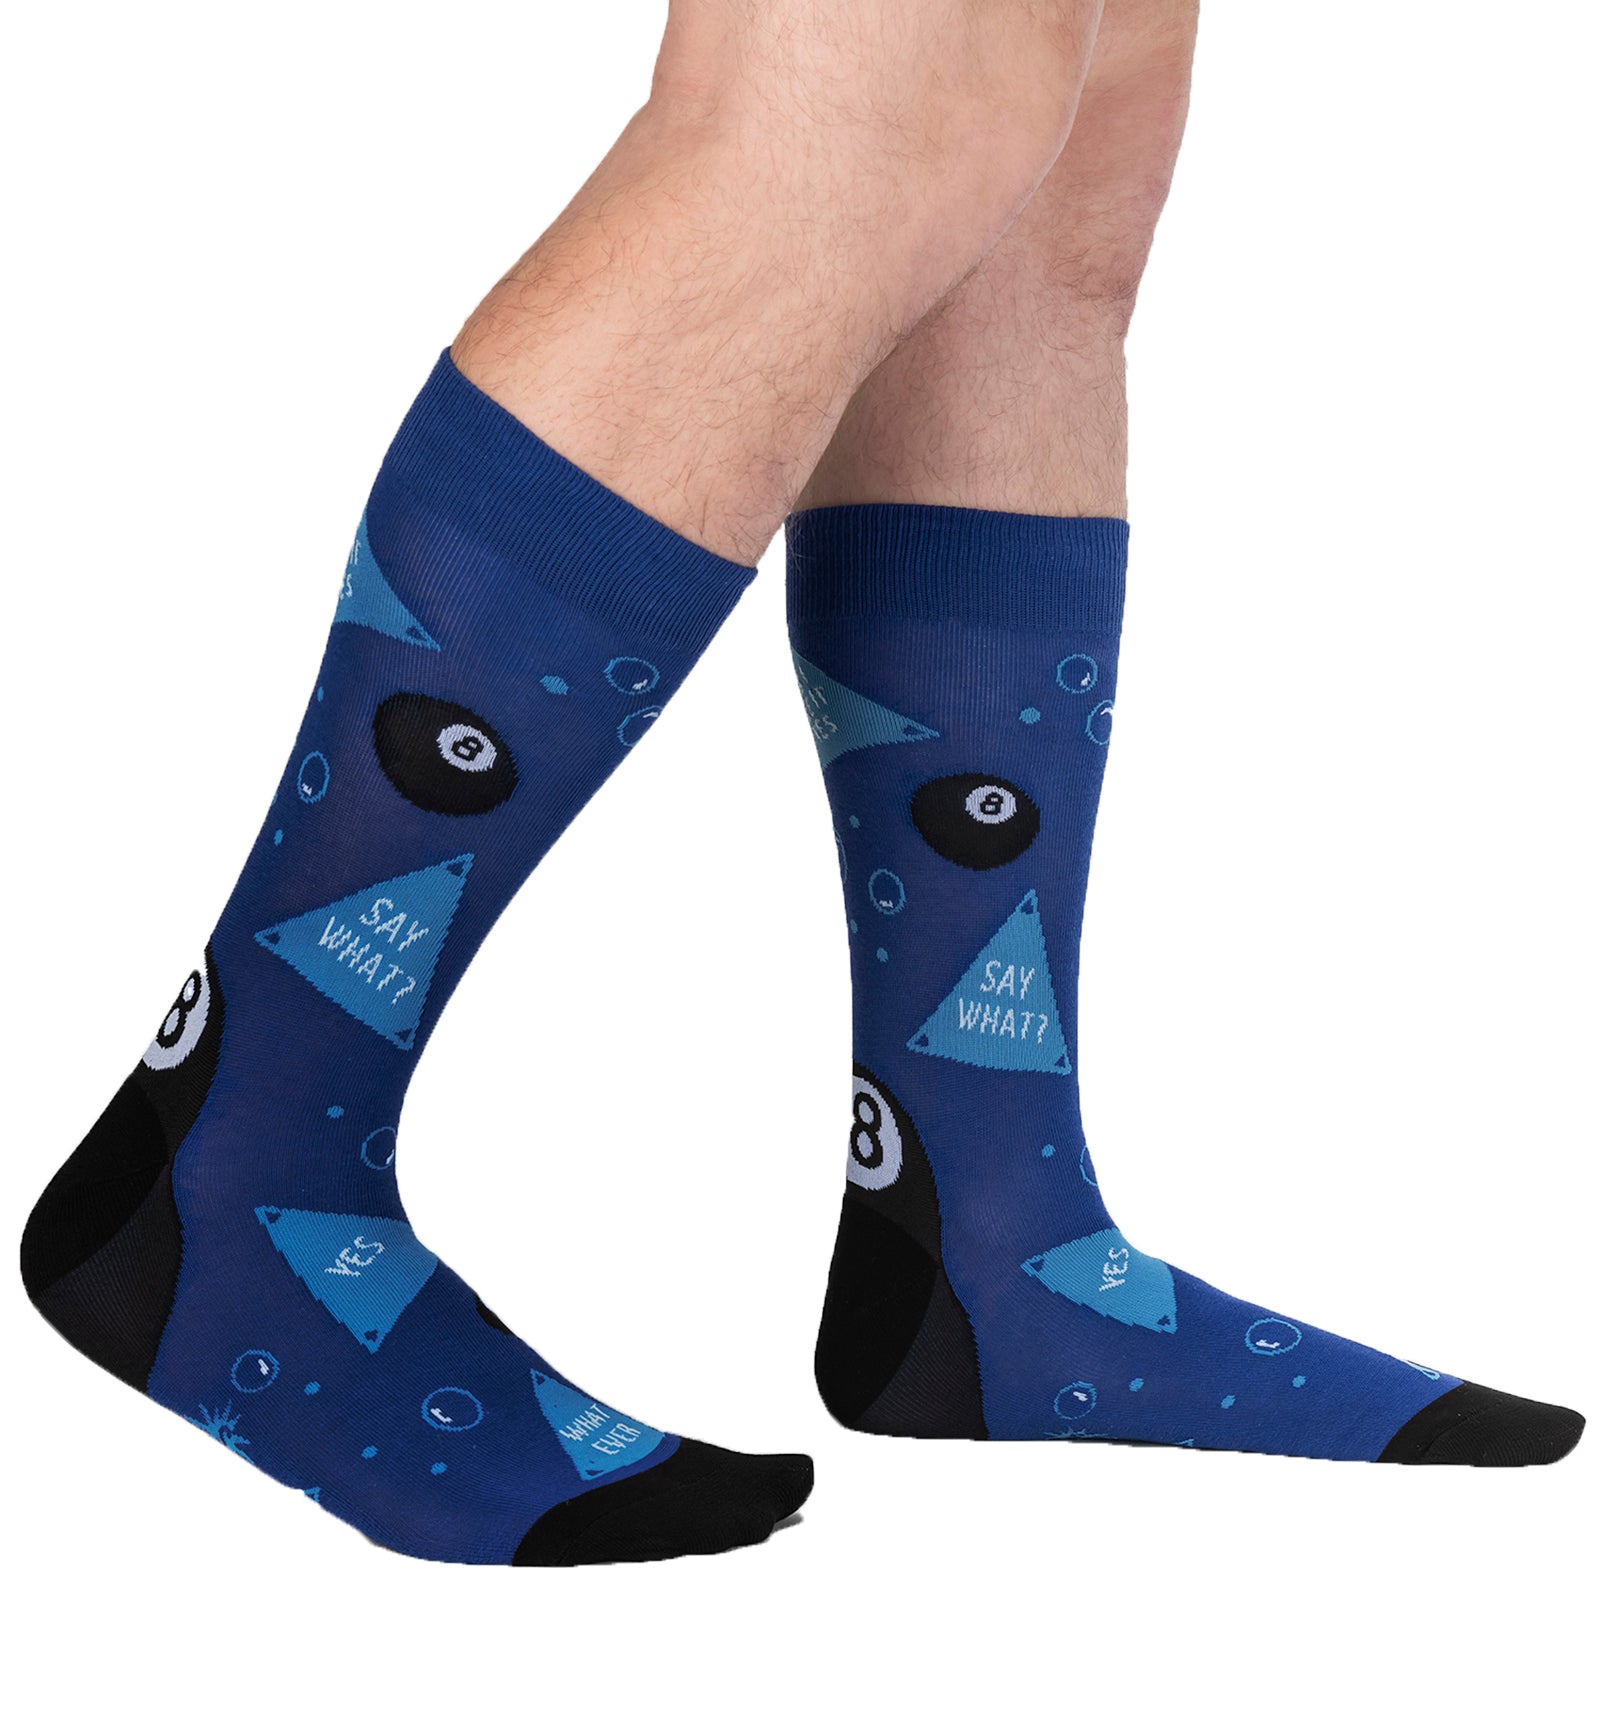 SOCK it to me Men's Crew Socks (MEF0626),Sources Say Yes - Sources Say Yes,One Size